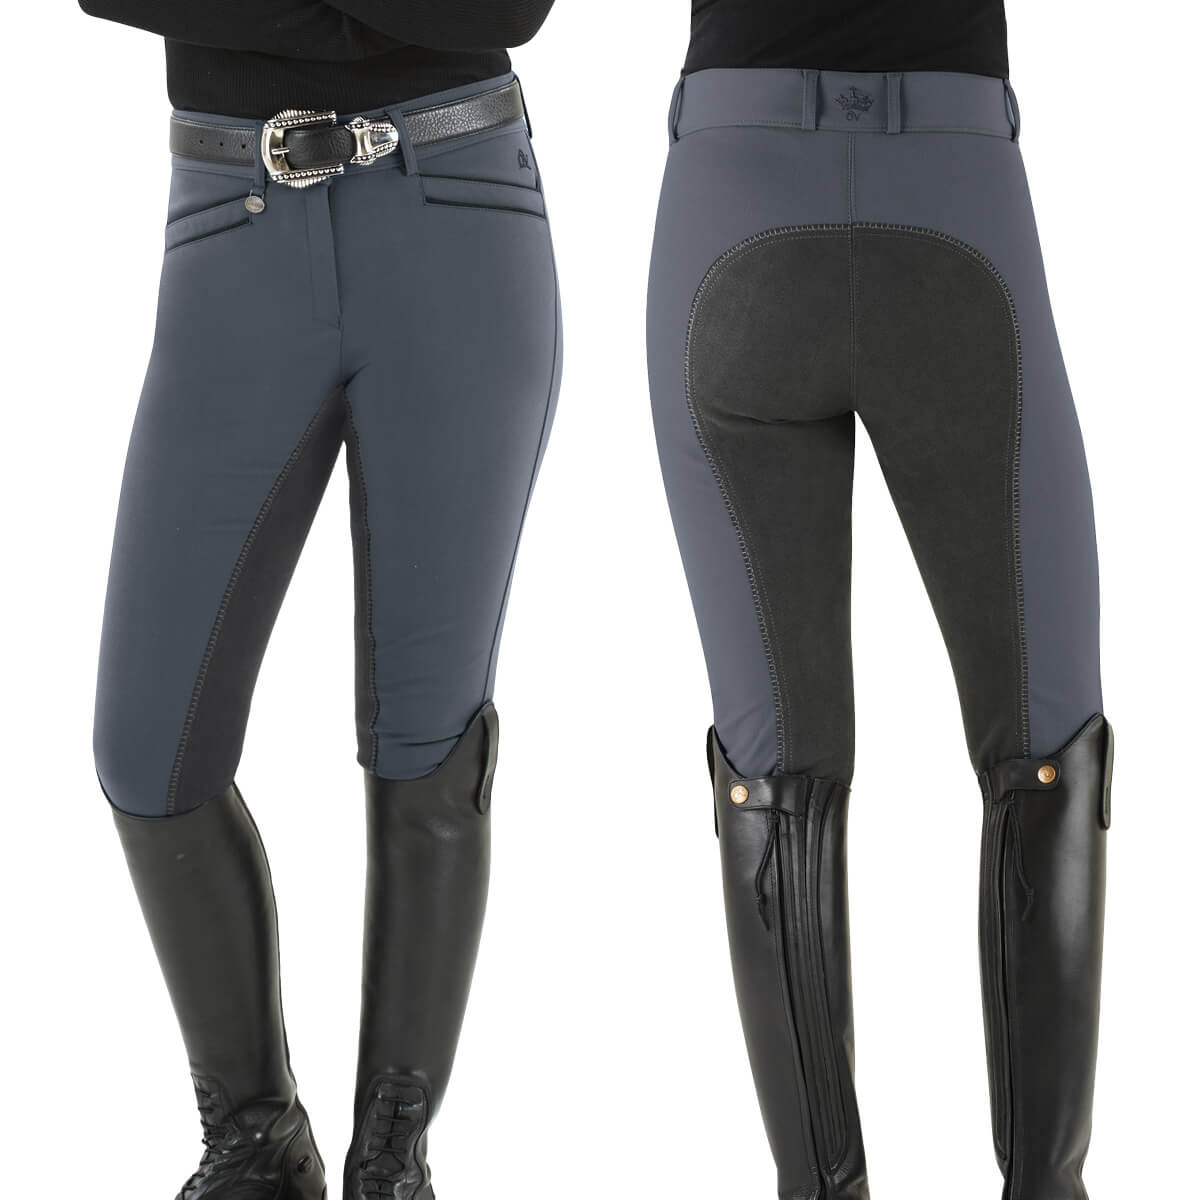 Product Review: Ovation Slim Secret and EuroWeave DX Breeches